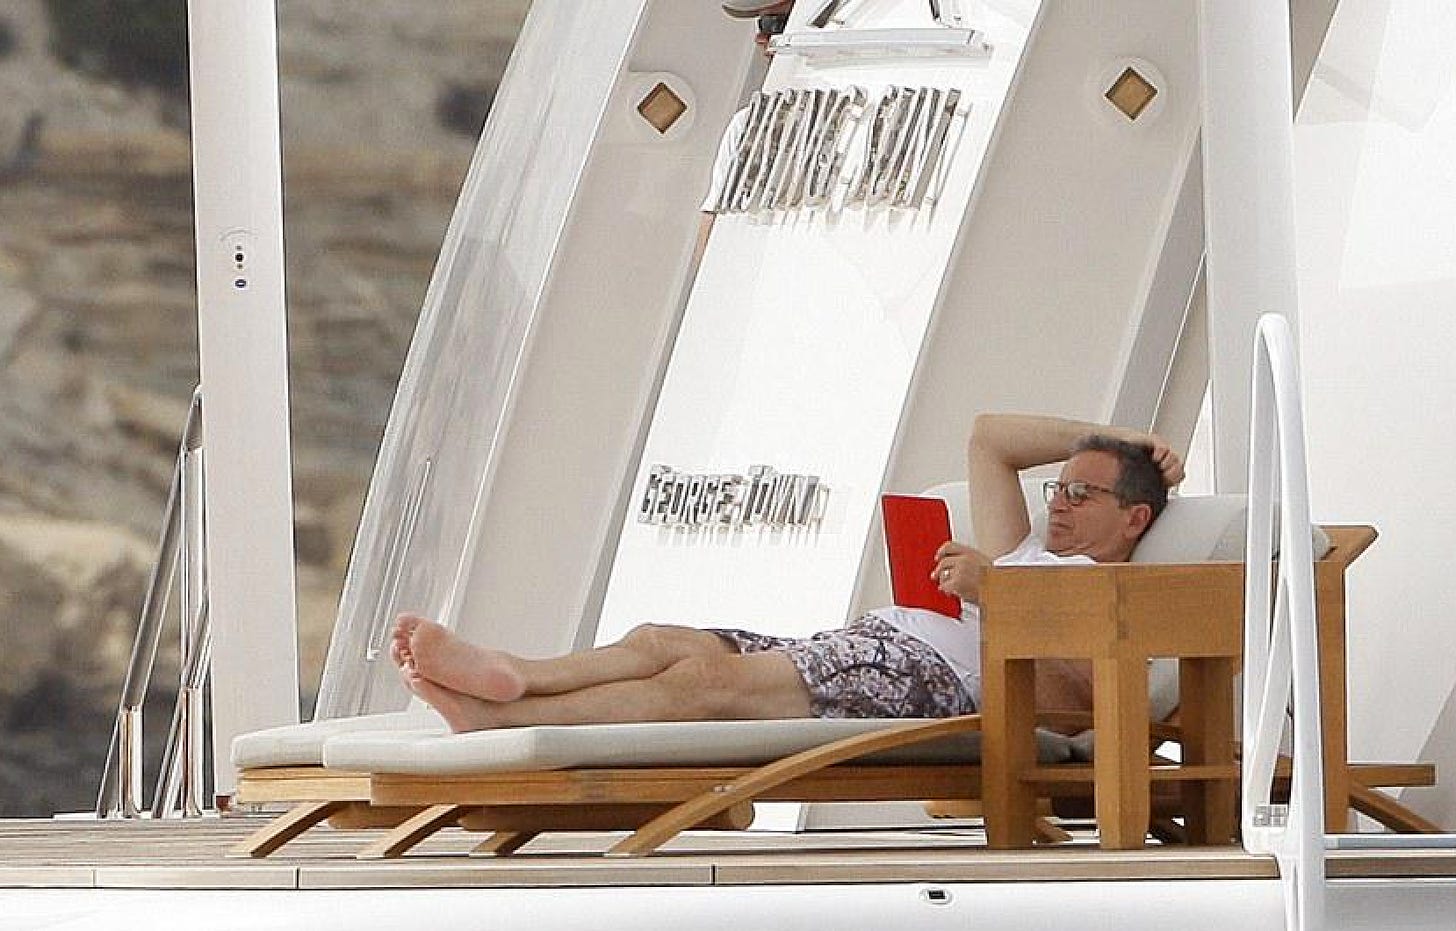 Bob reading a book lying on a deck chair on a boat